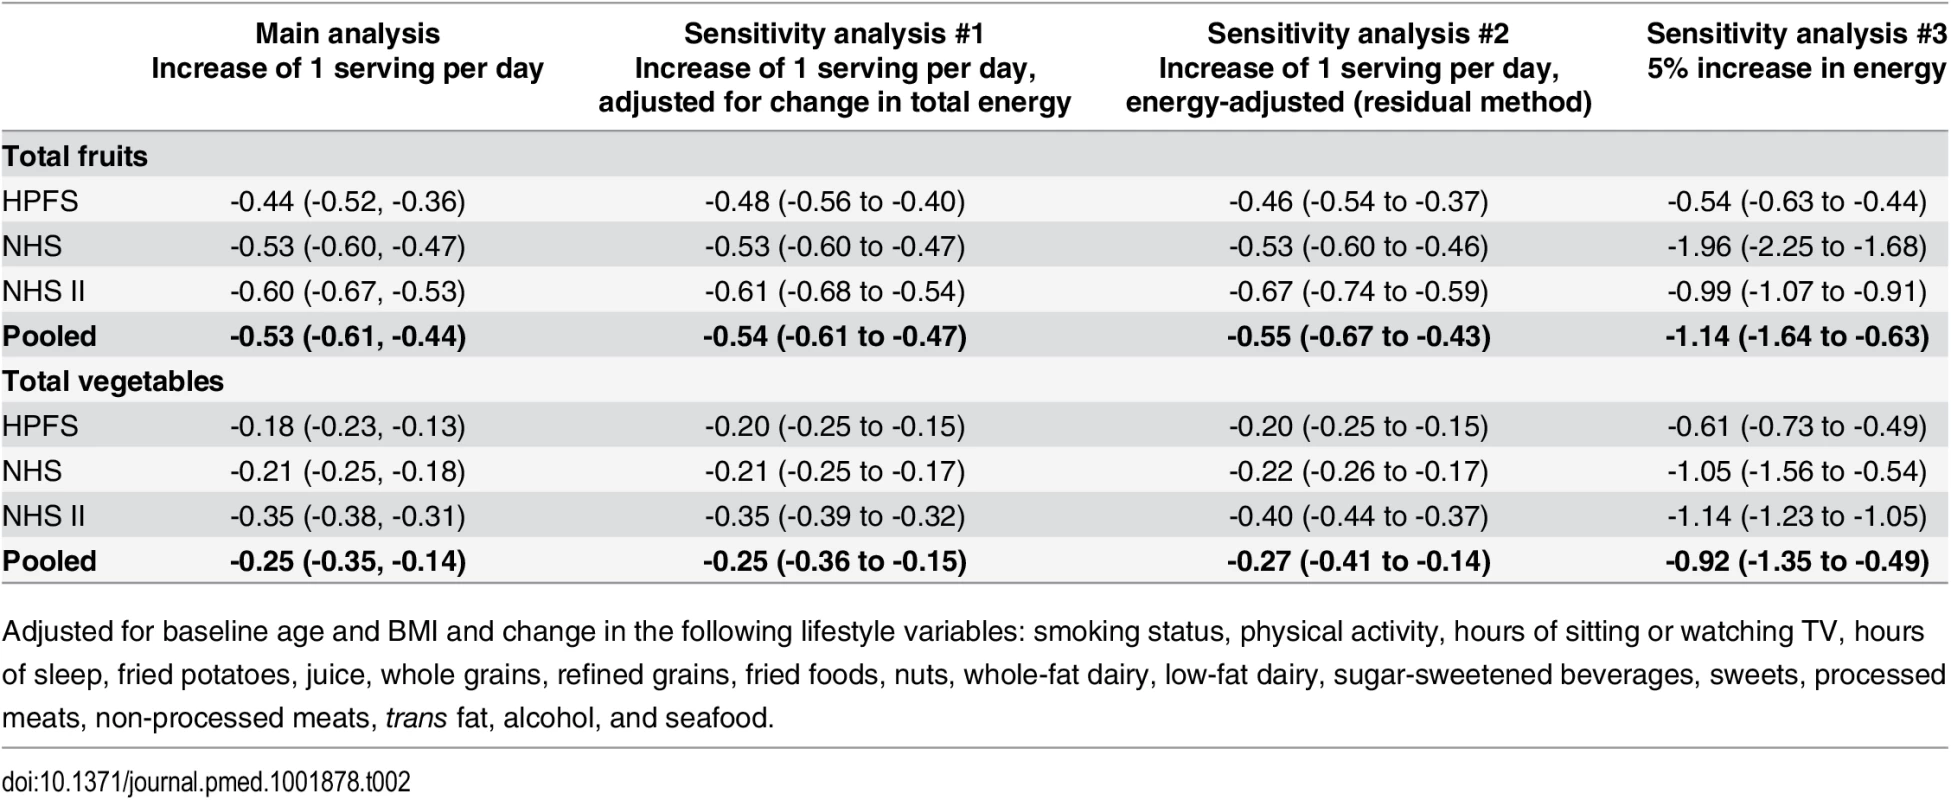 Energy sensitivity analyses: Weight change (lb) associated with increased consumption of fruits and vegetables over 4 y.